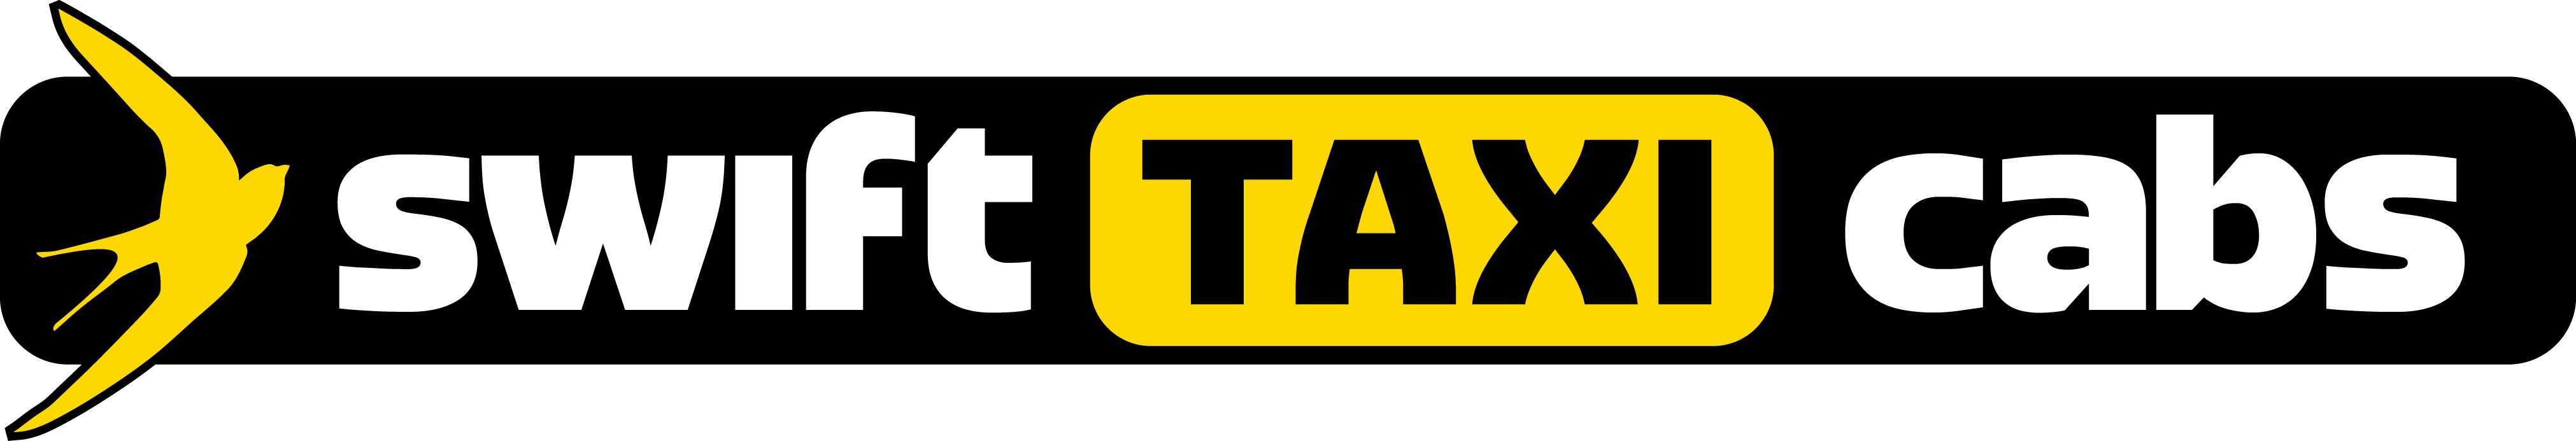 Swift Taxi Cabs